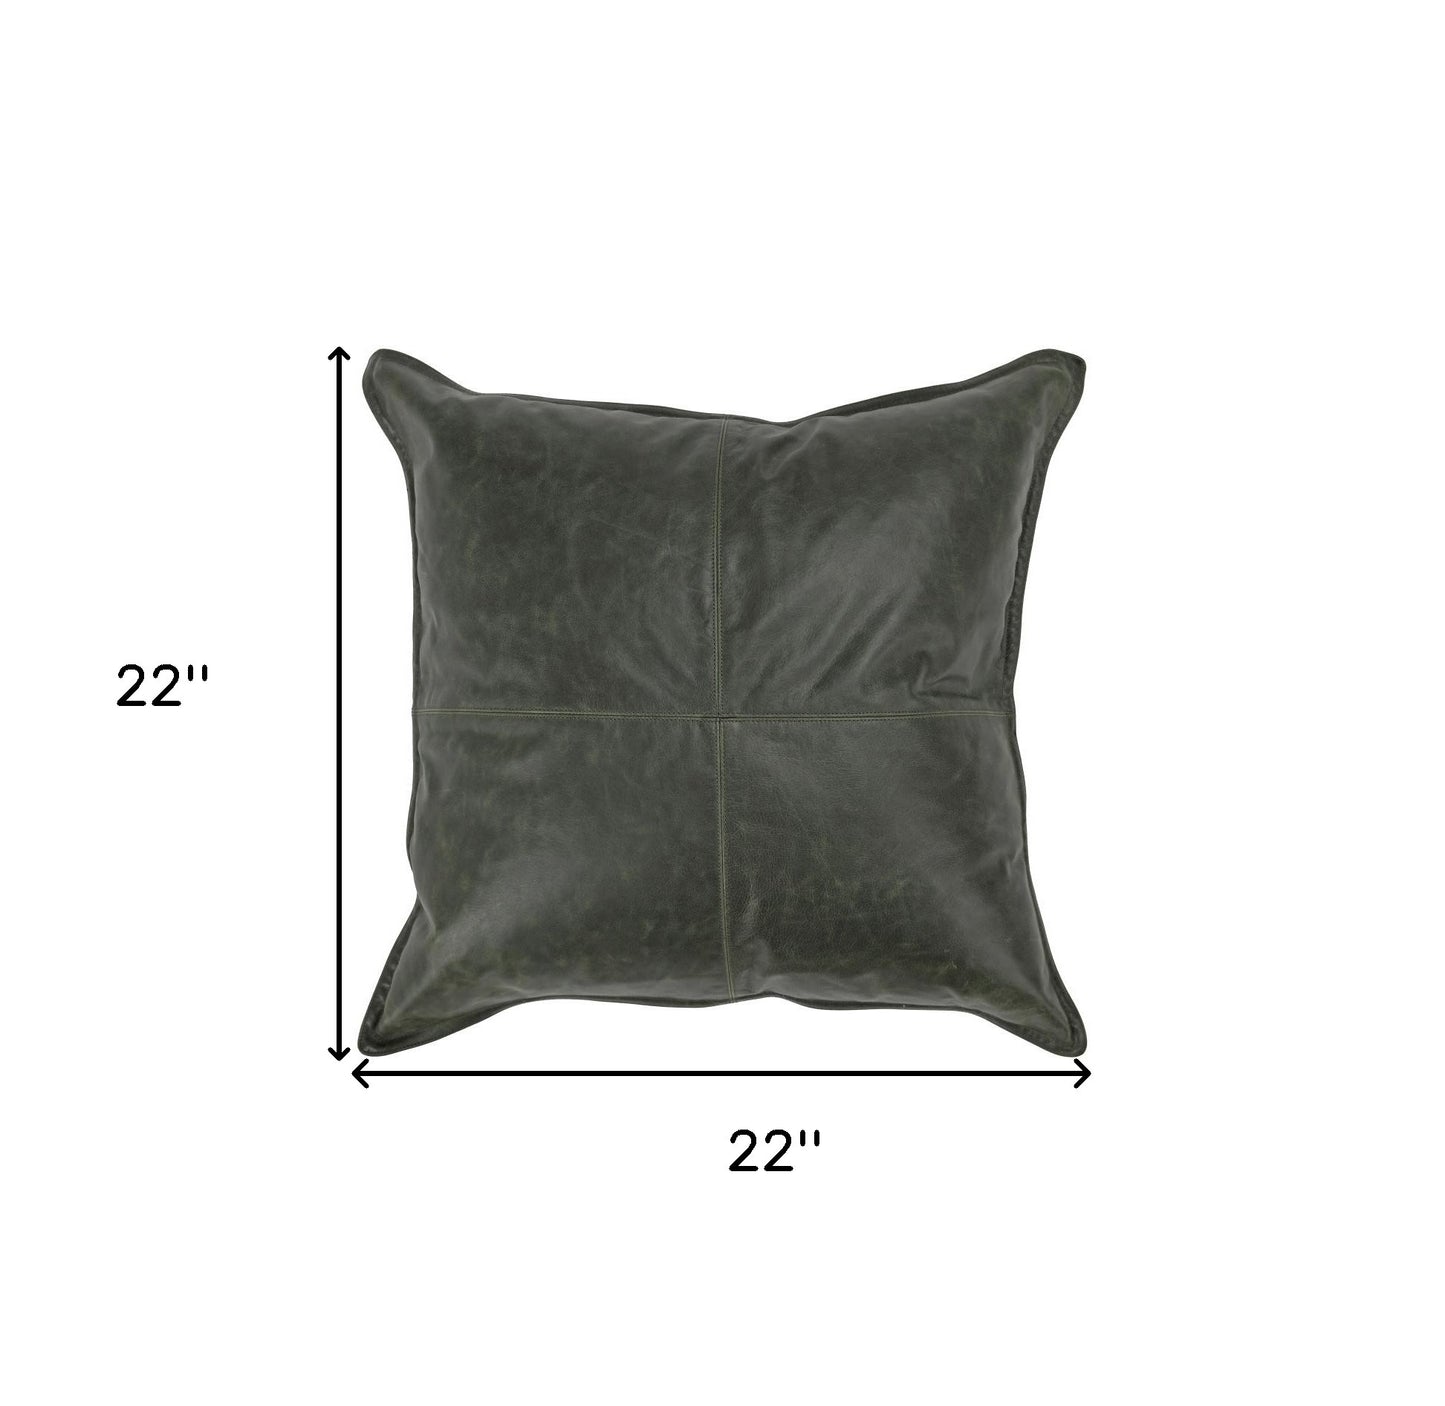 22" X 22" Green Leather Zippered Pillow